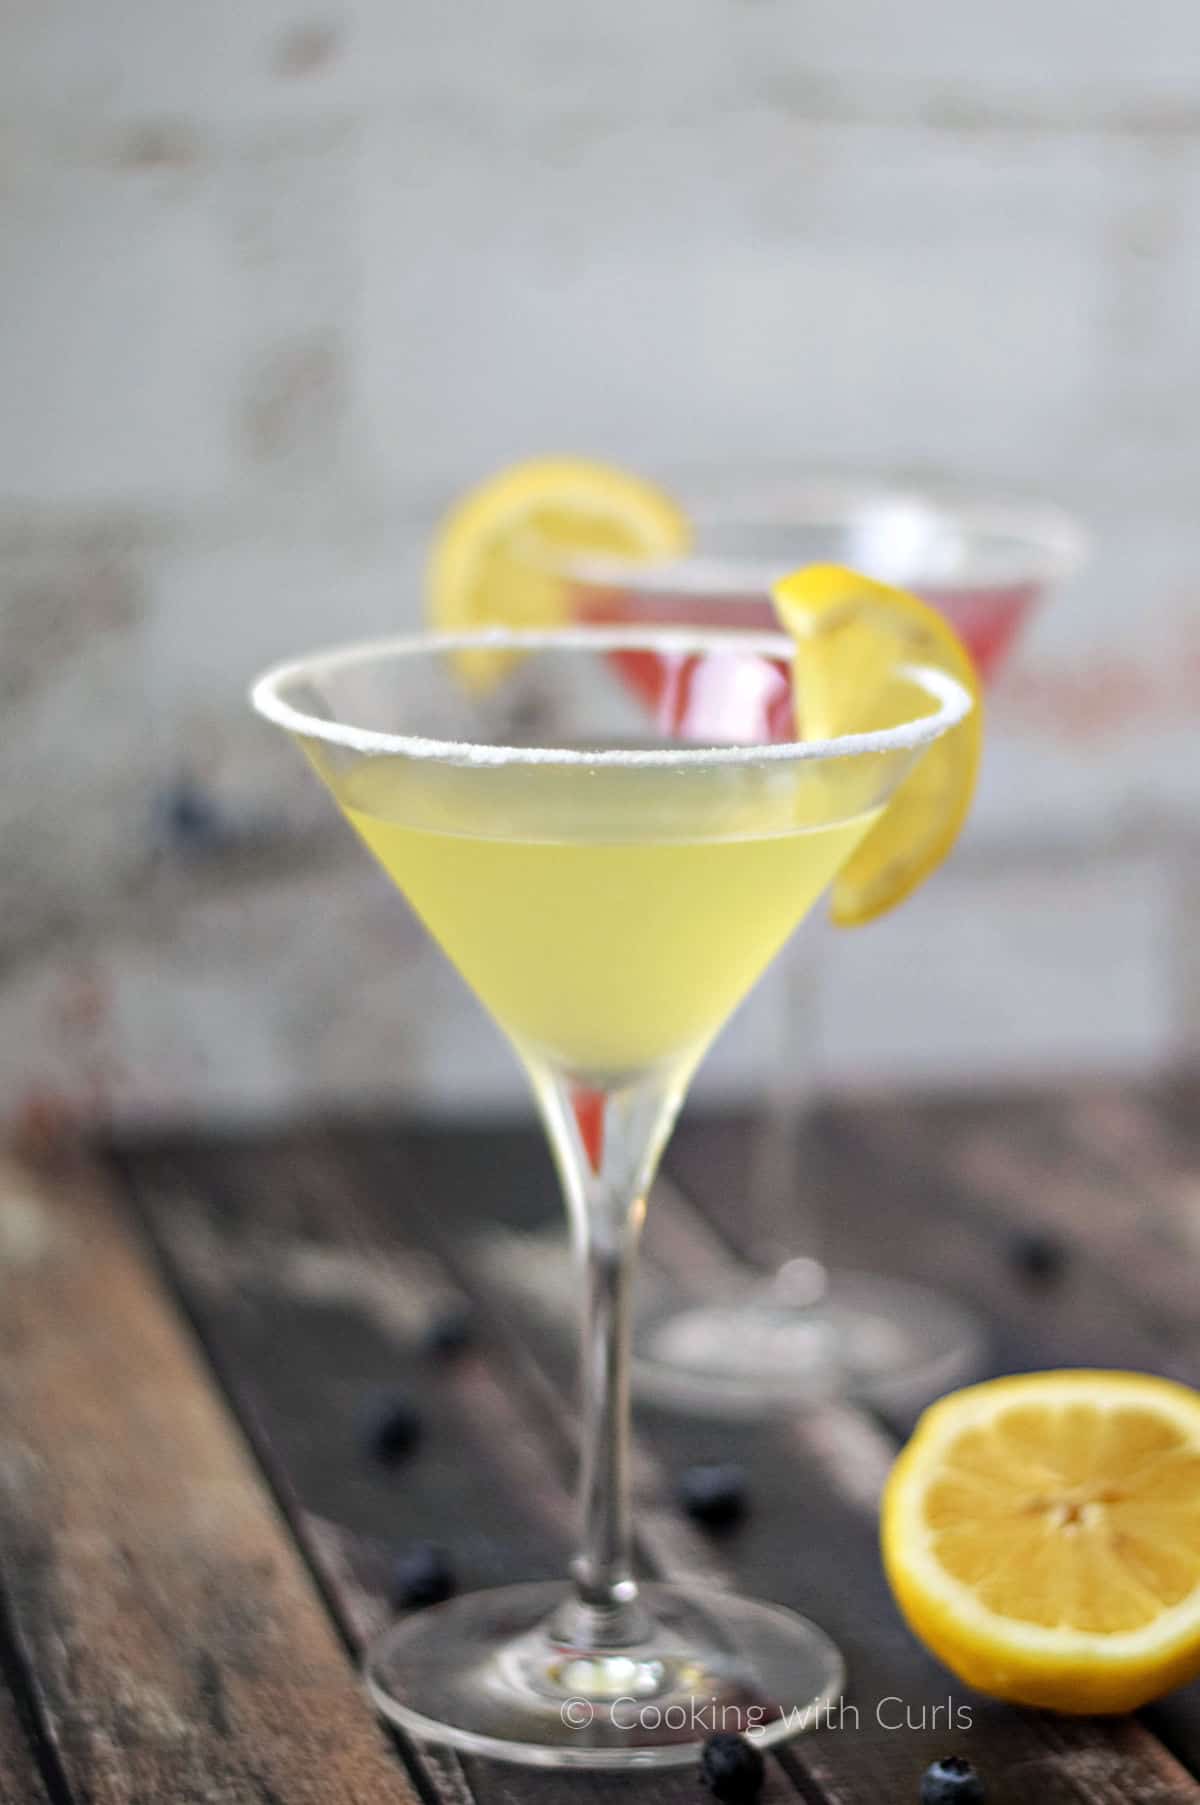 a lemon drop martini sitting in front of a huckleberry martini each garnished with a lemon slice.